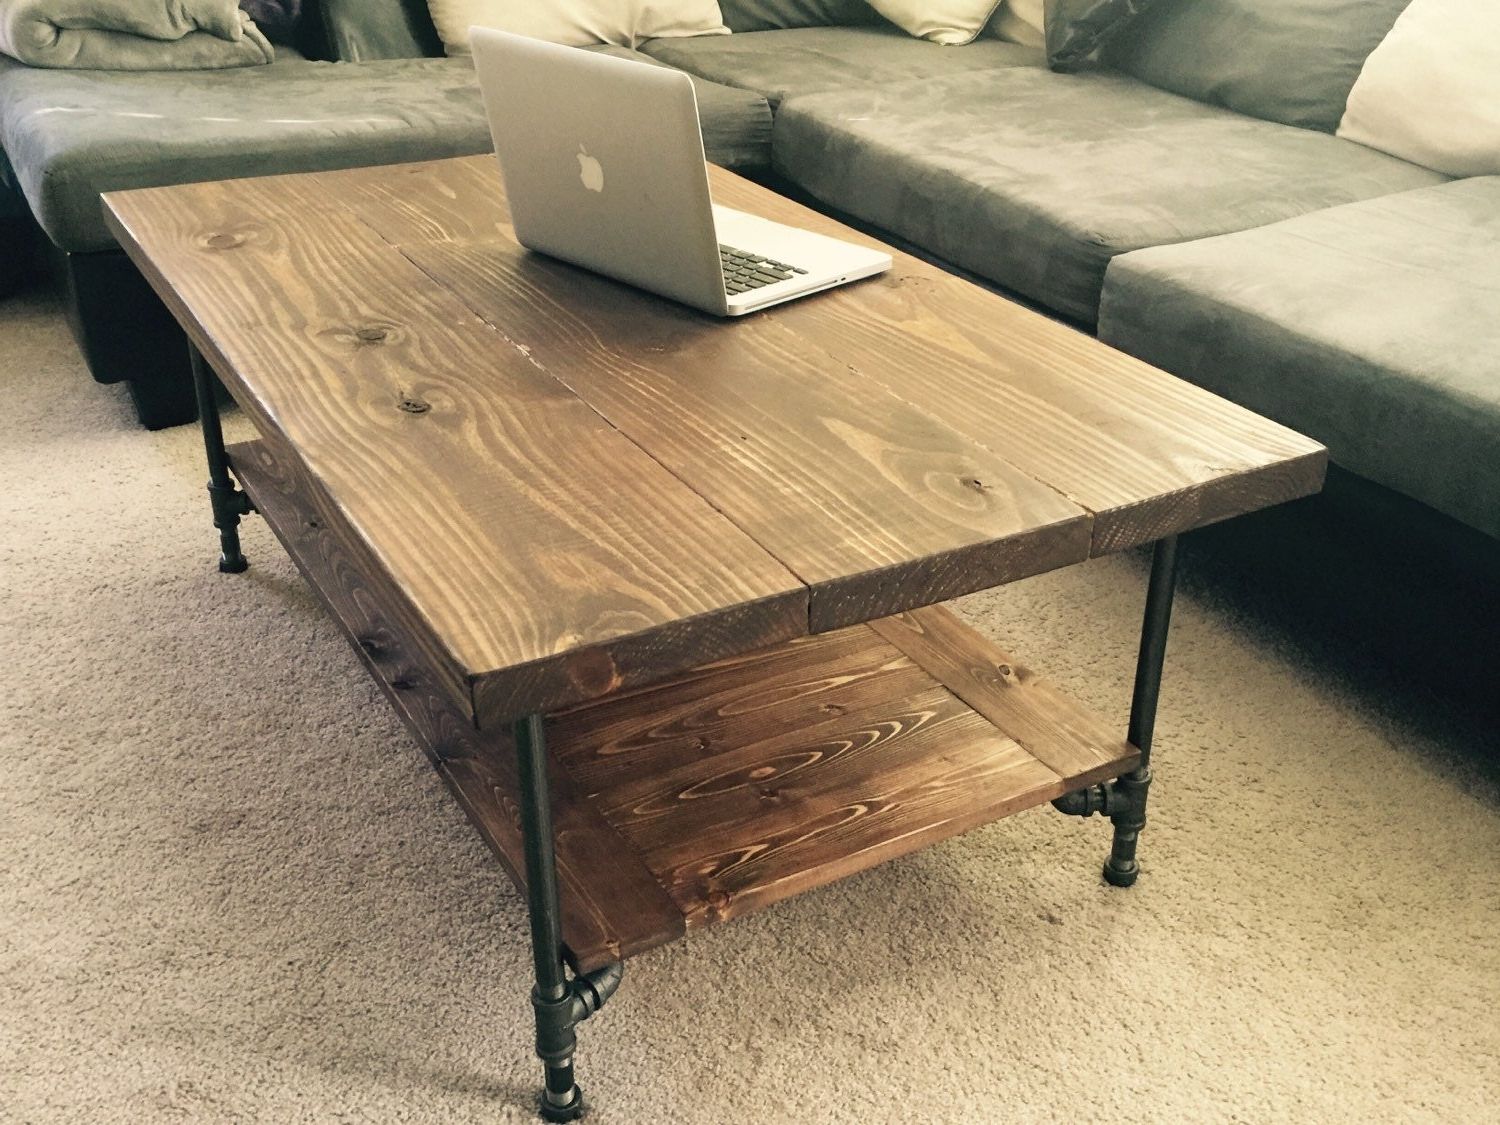 Large Industrial Rustic Wood Pipe Coffee Table With Current Rustic Espresso Wood Coffee Tables (Gallery 5 of 20)